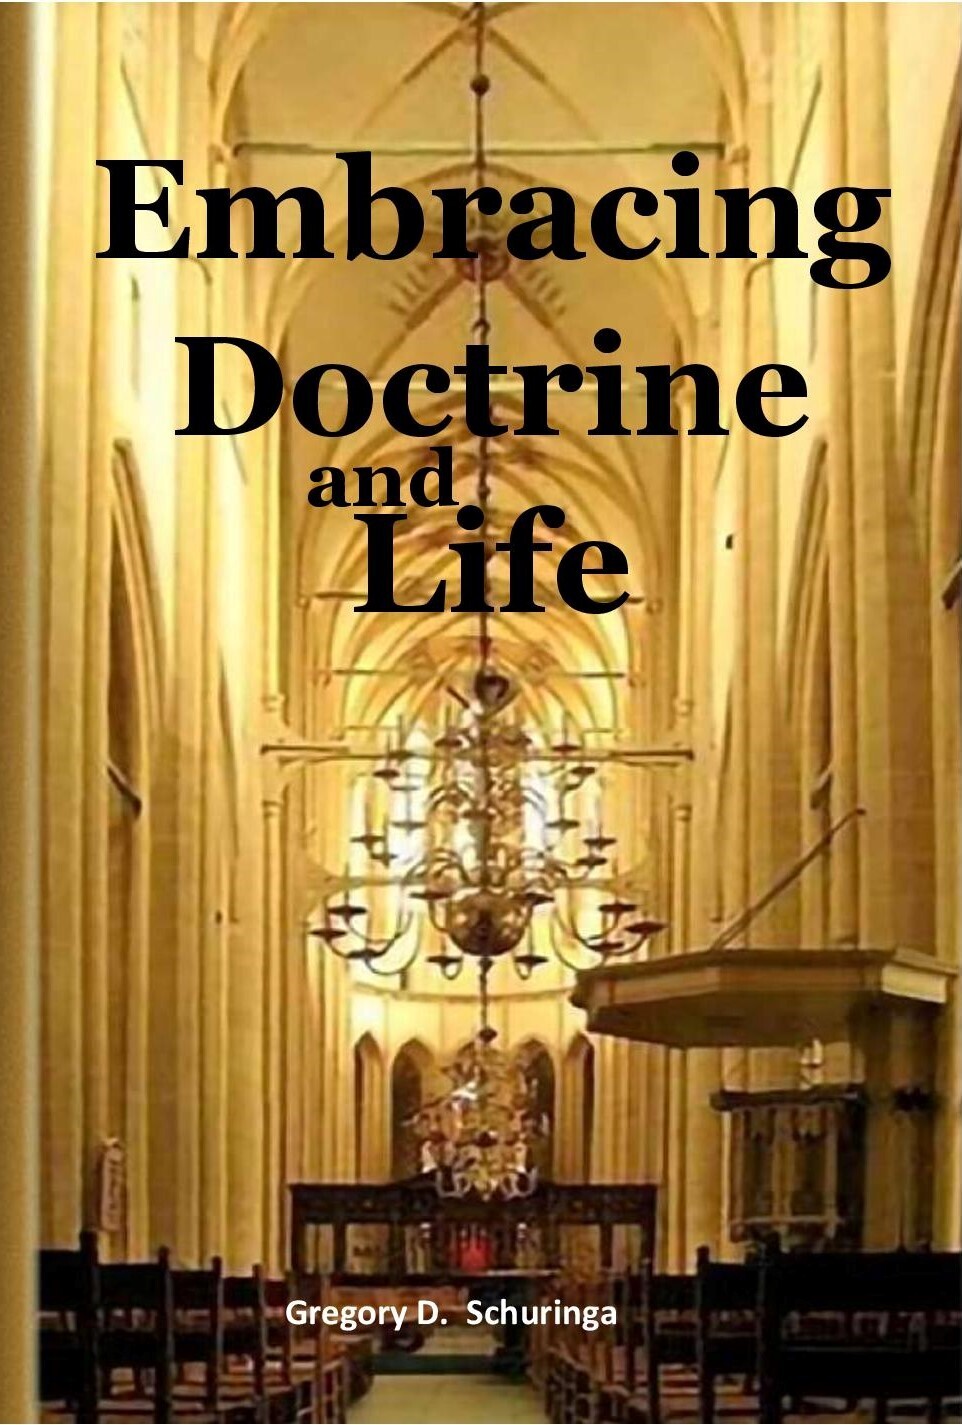 Embracing Doctrine and Life: Simon Oomius in the Context of Further Reformation Orthodoxy by Gregory D. Schuringa. Foreword by Richard Muller